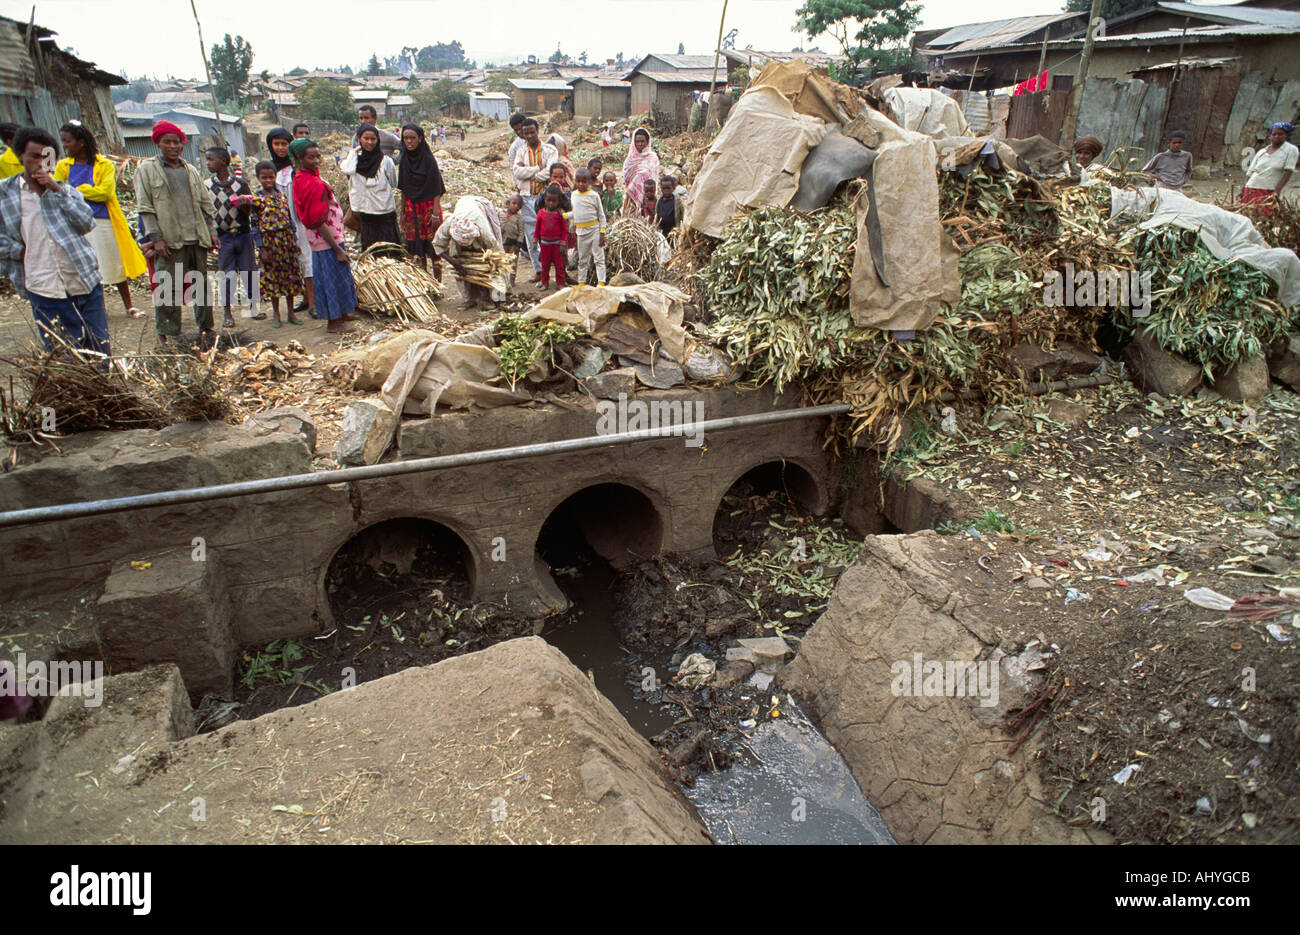 Slum dwellers living in overcrowded, poor housing with open sewers in a slum area of Addis Ababa, Ethiopia Stock Photo